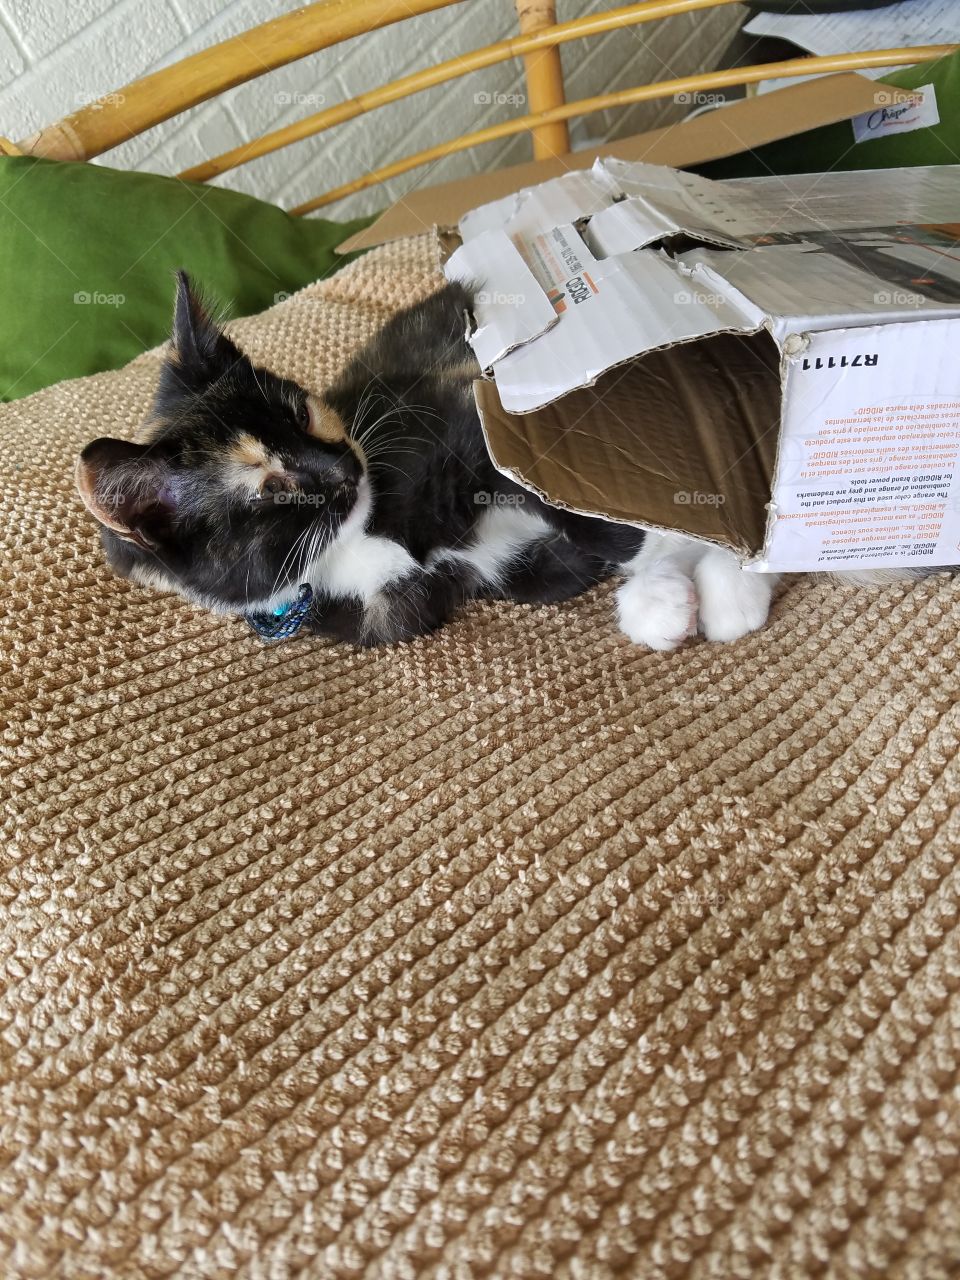 Calico kitten makes box her blanket for midday nap.